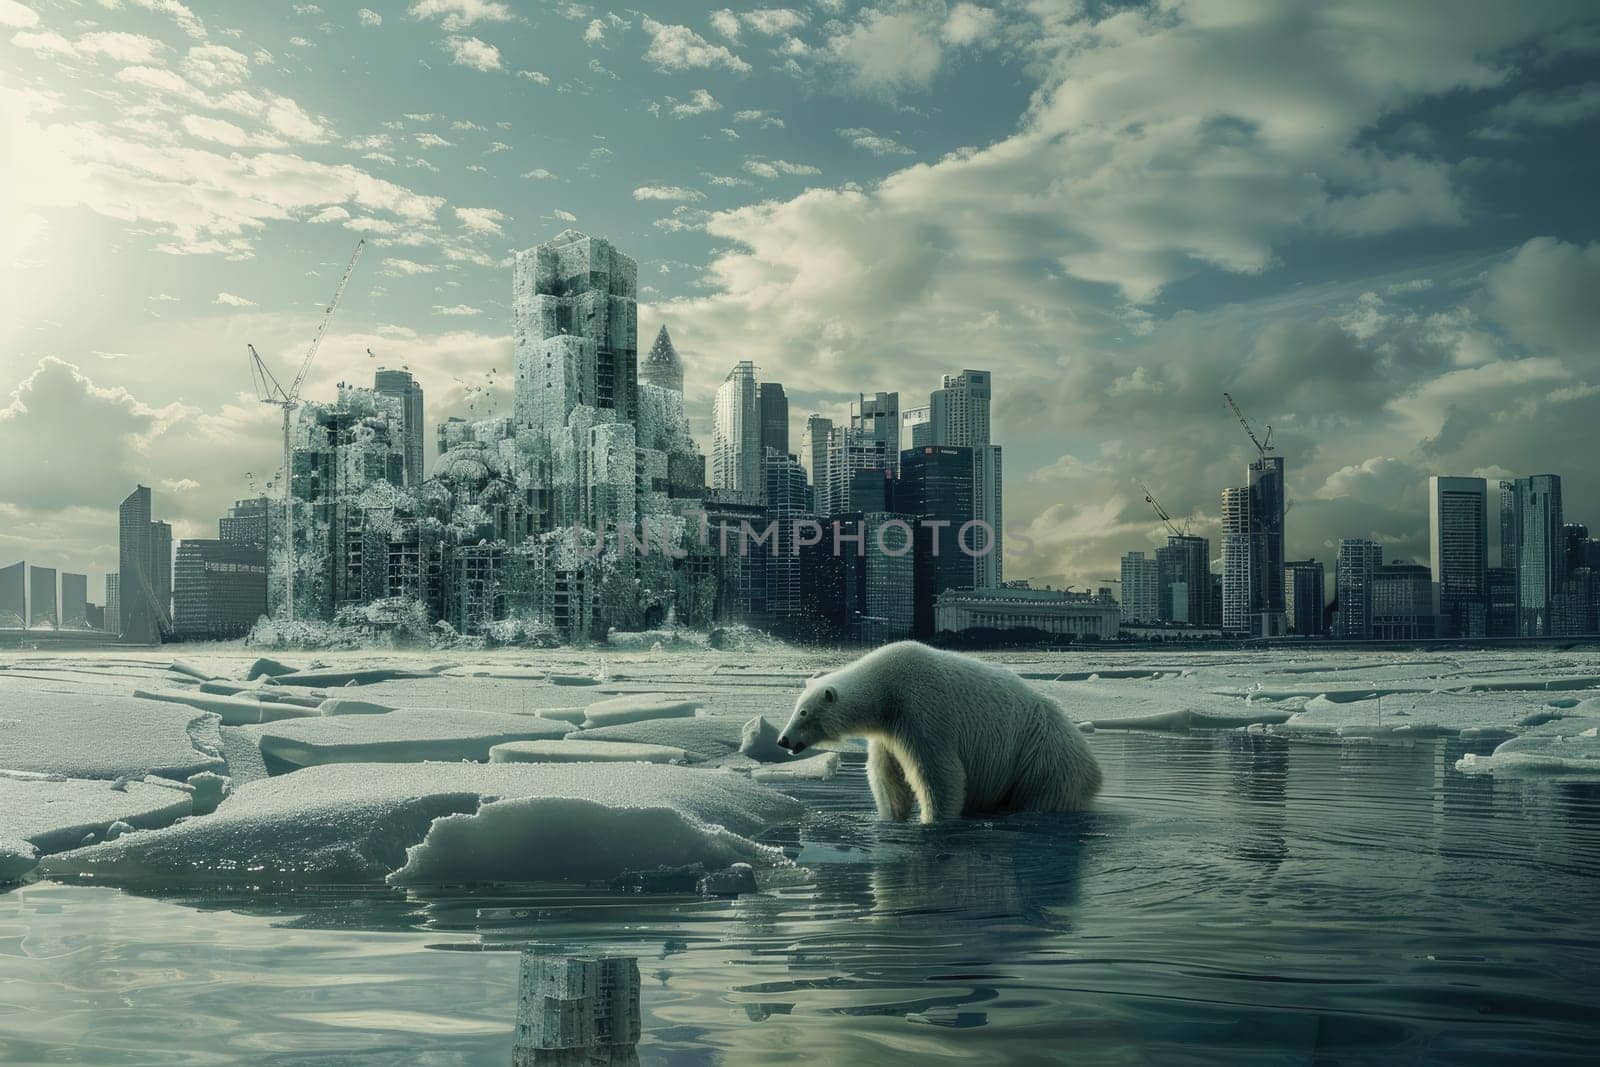 A polar bear is seen in a city with a large building in the background, Global warming concept by nijieimu